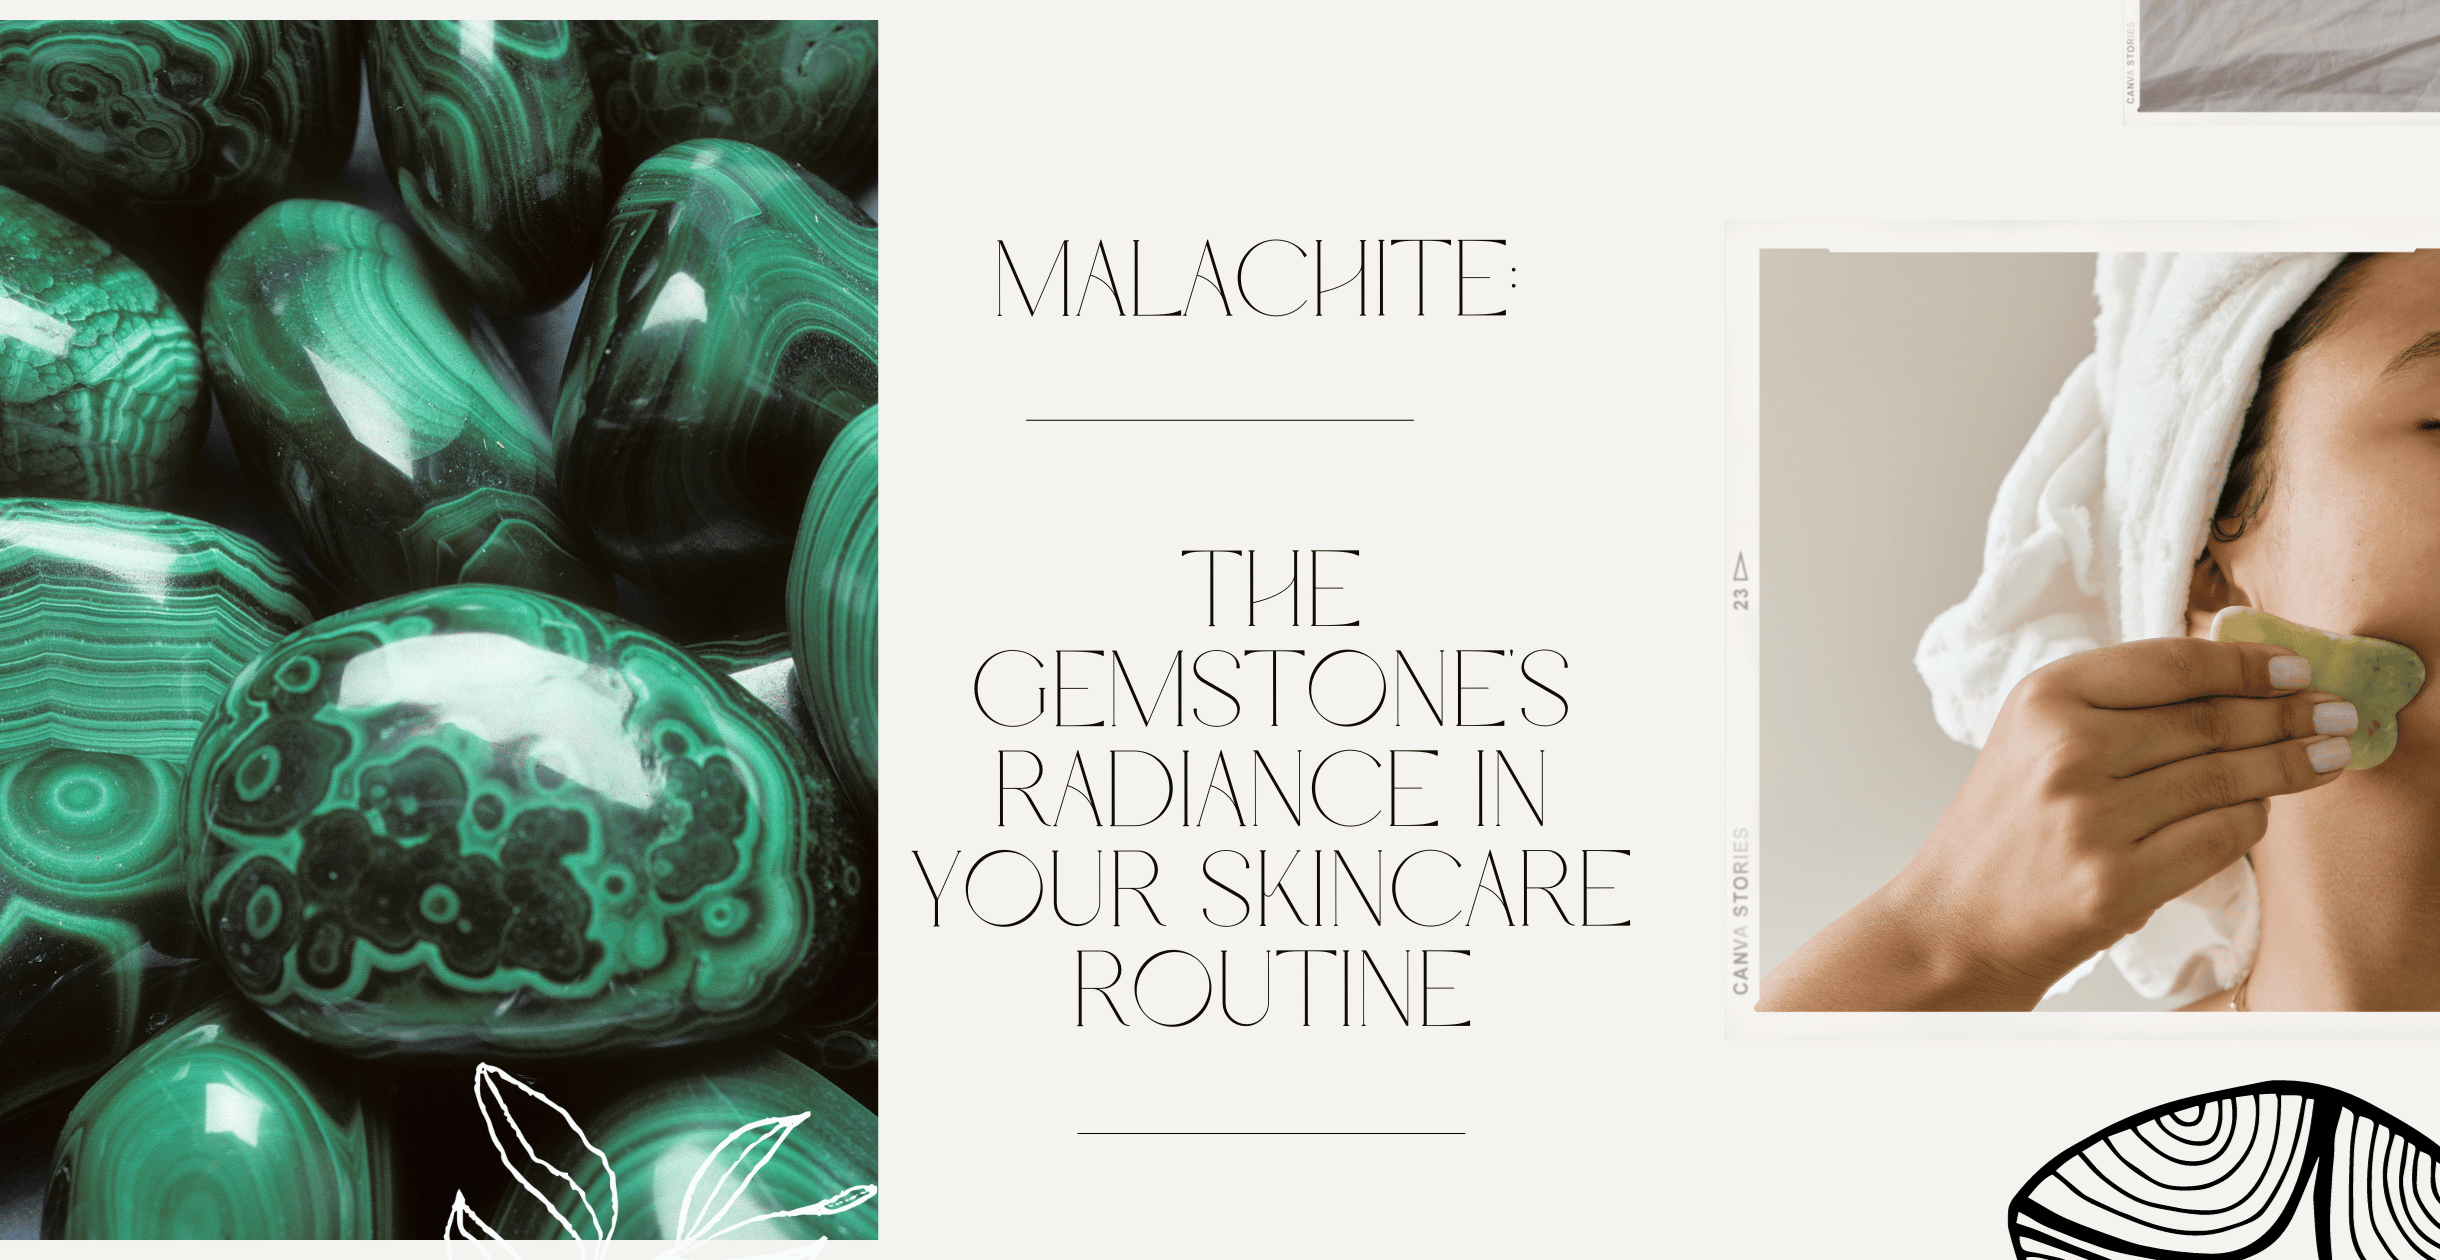 Malachite: The Gemstone's Radiance in Your Skincare Routine